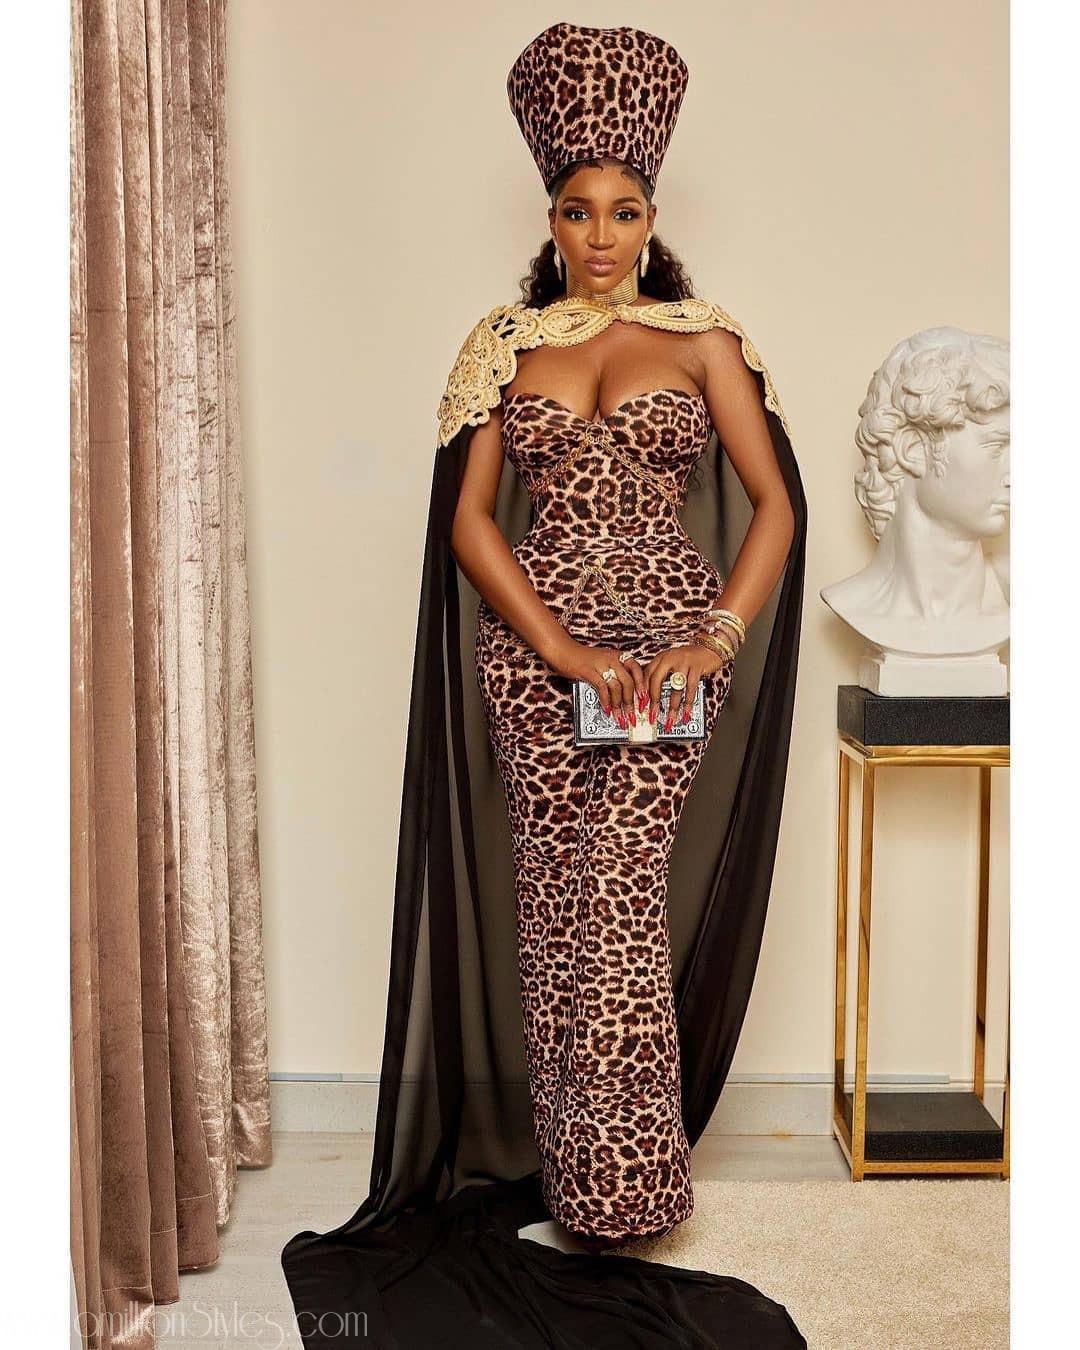 See Regal Outfits That Graced The "Coming To America 2" Movie Premiere